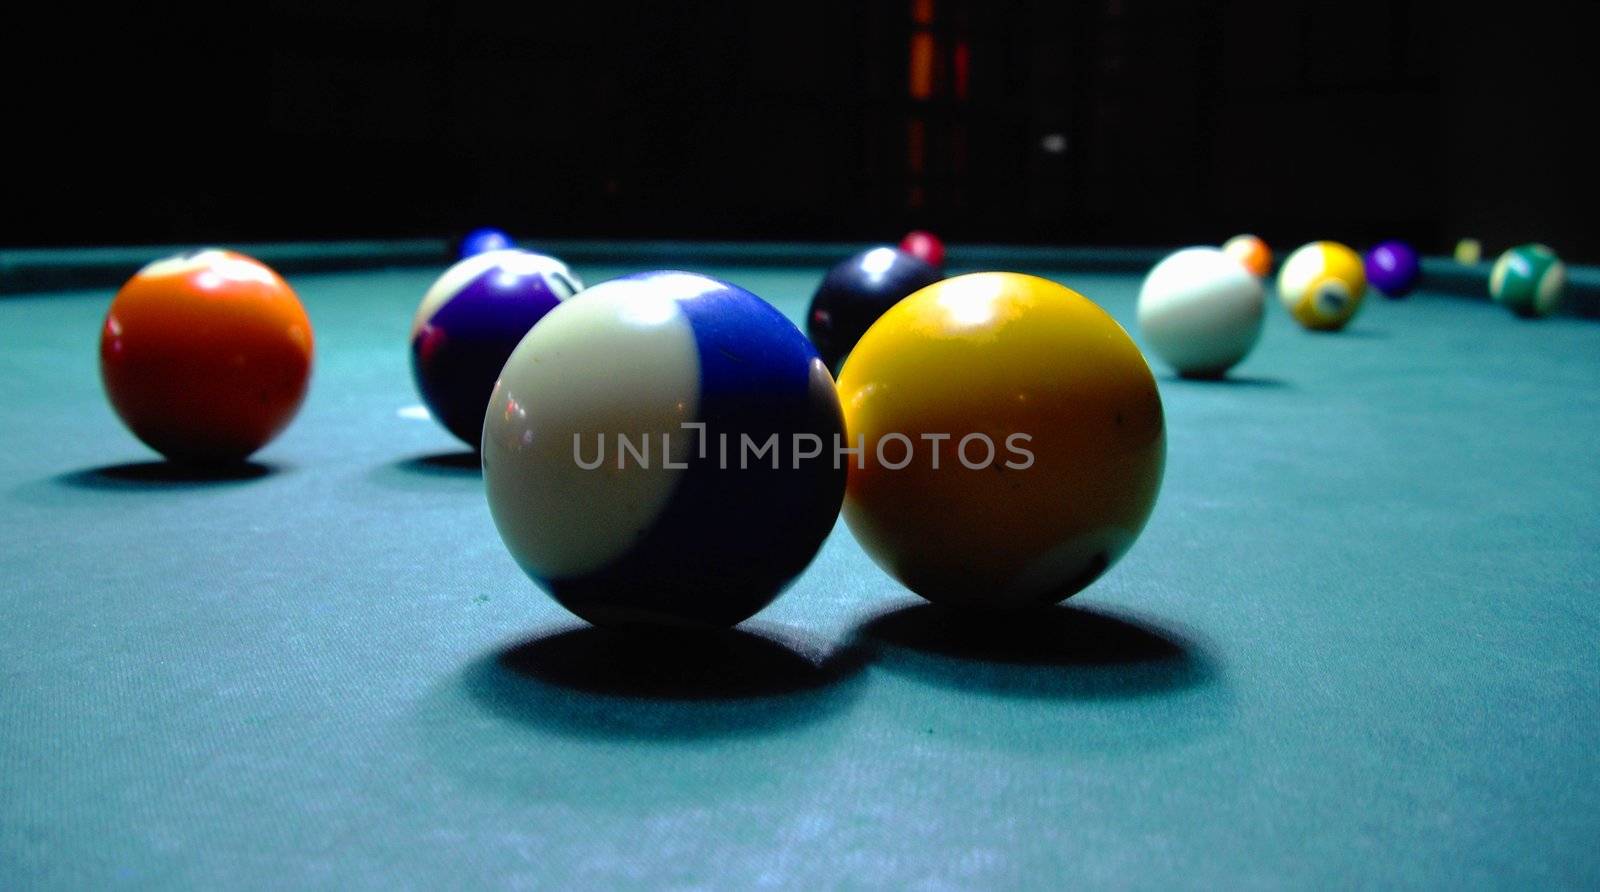 The billiards by Elet